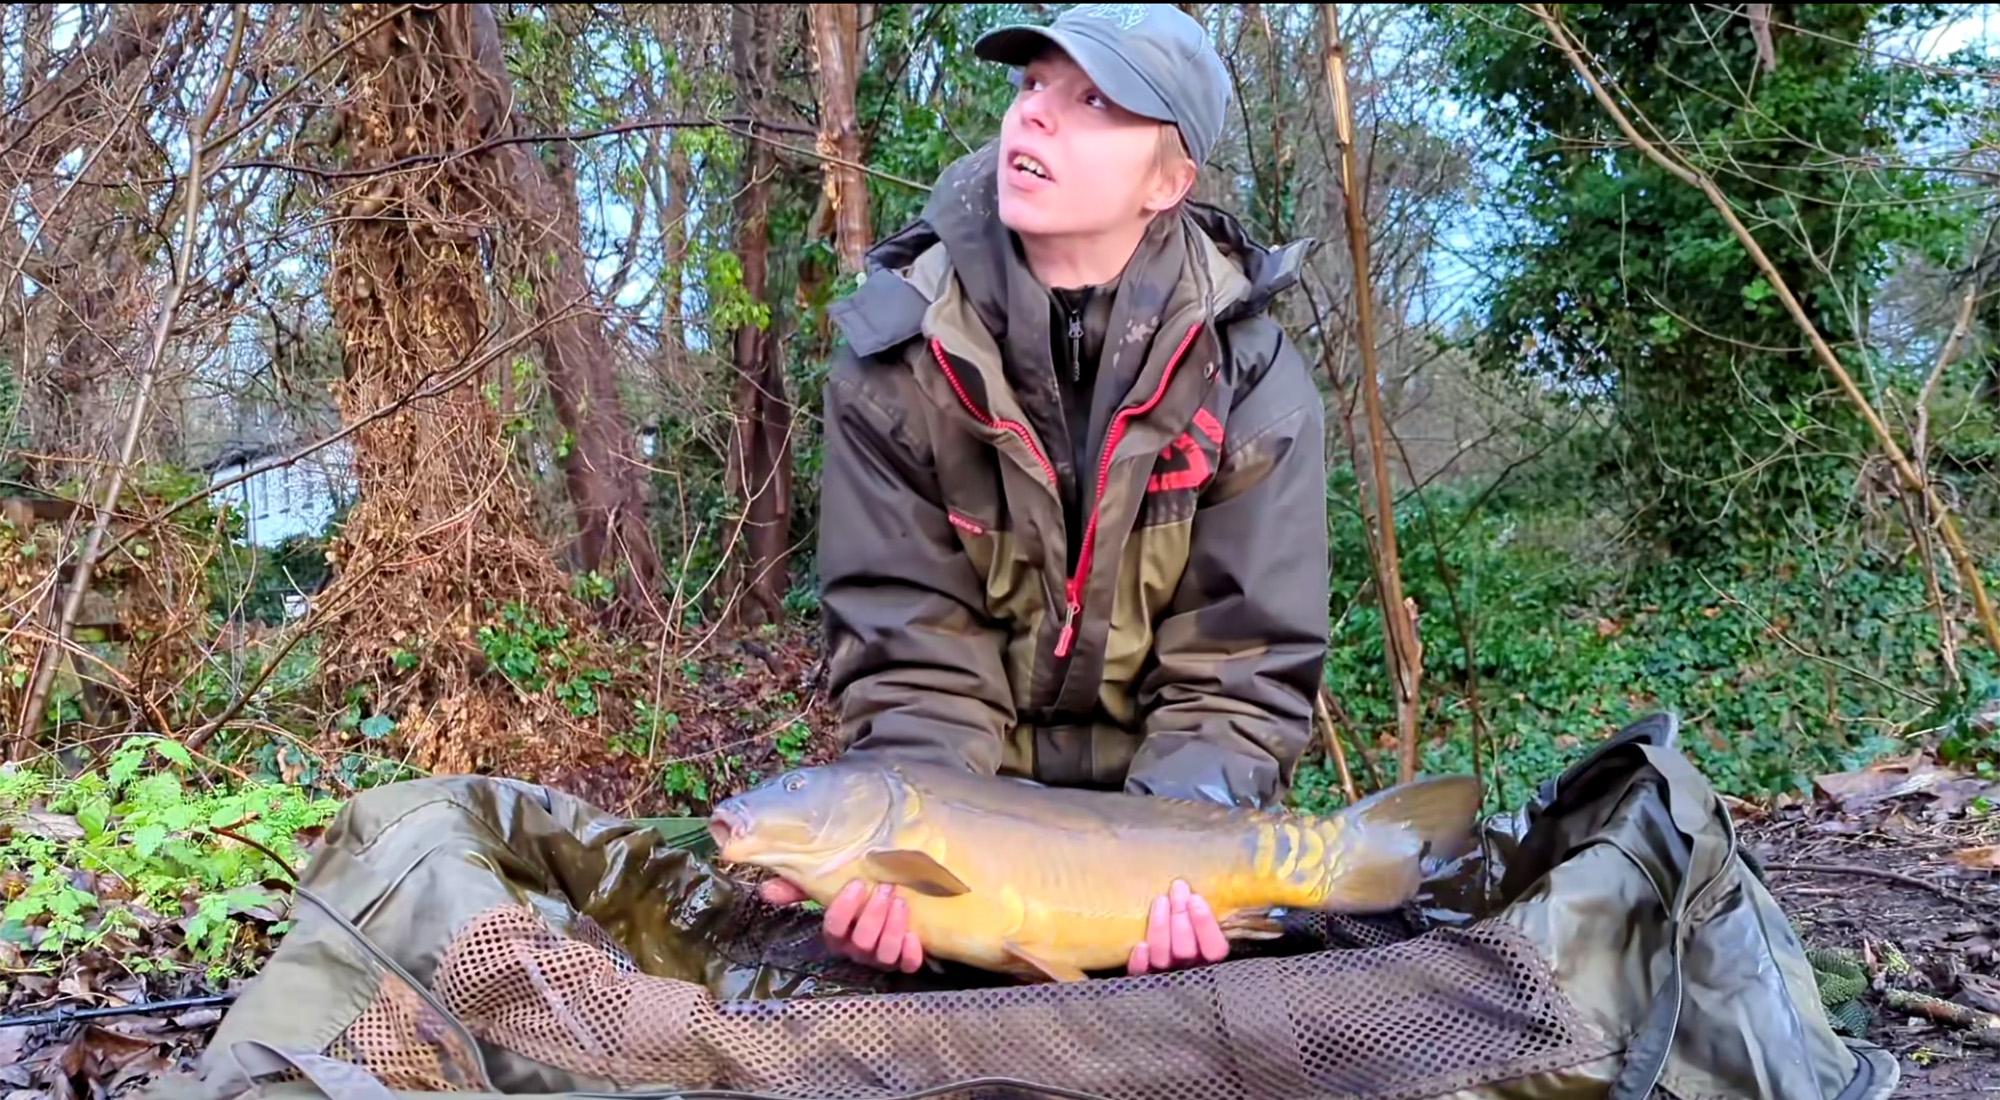 Watch a British Angler Keep Her Cool While an Irate Onlooker Cusses Her Out